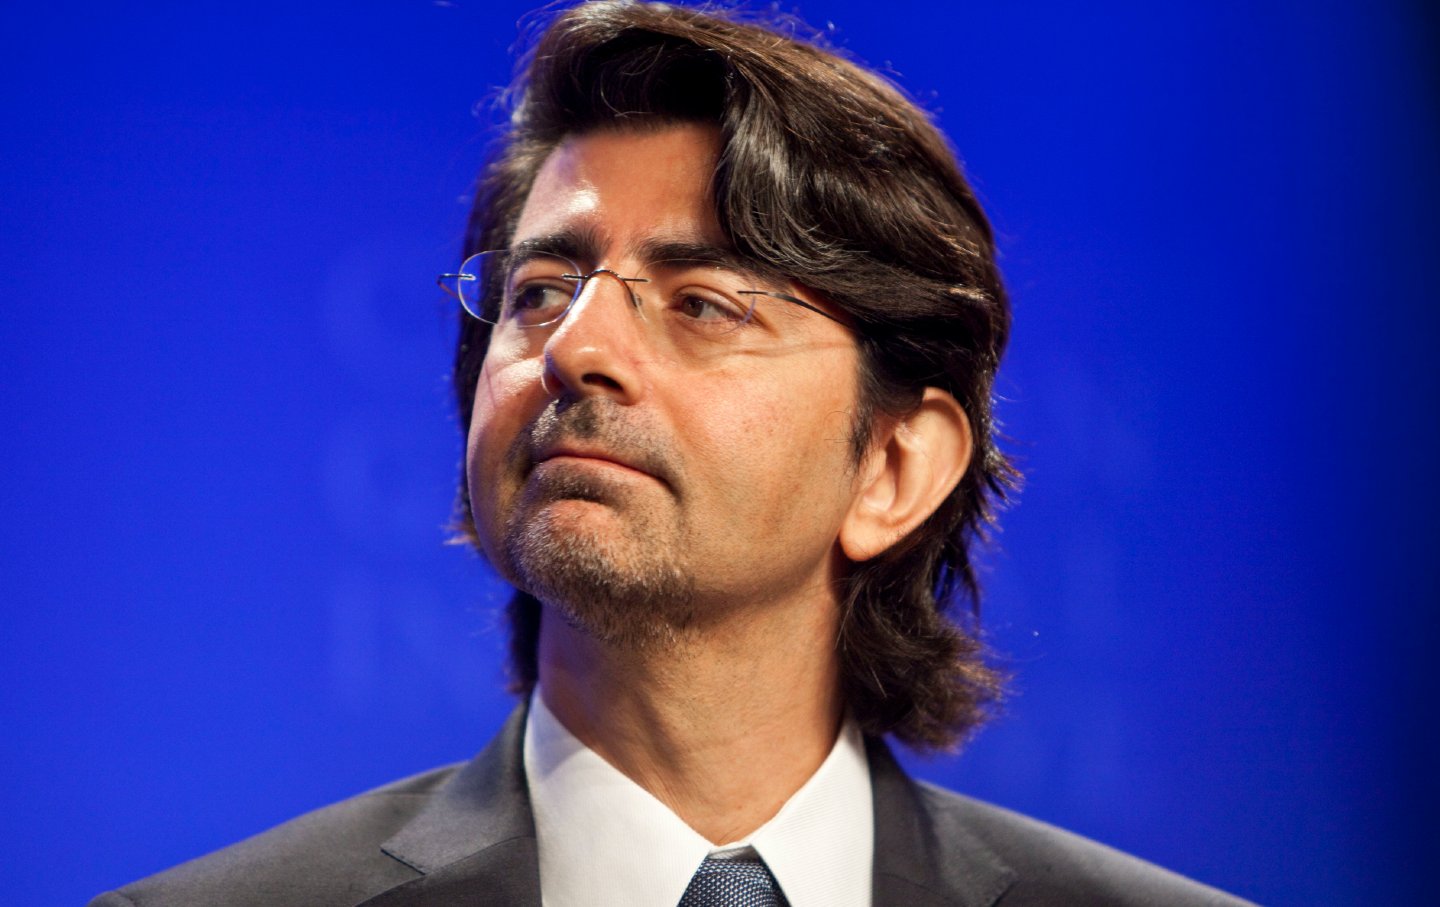 Pierre Omidyar, the chairman and founder of eBay, looks on during the final session of the annual Clinton Global Initiative meeting in New York, on September 23, 2010.